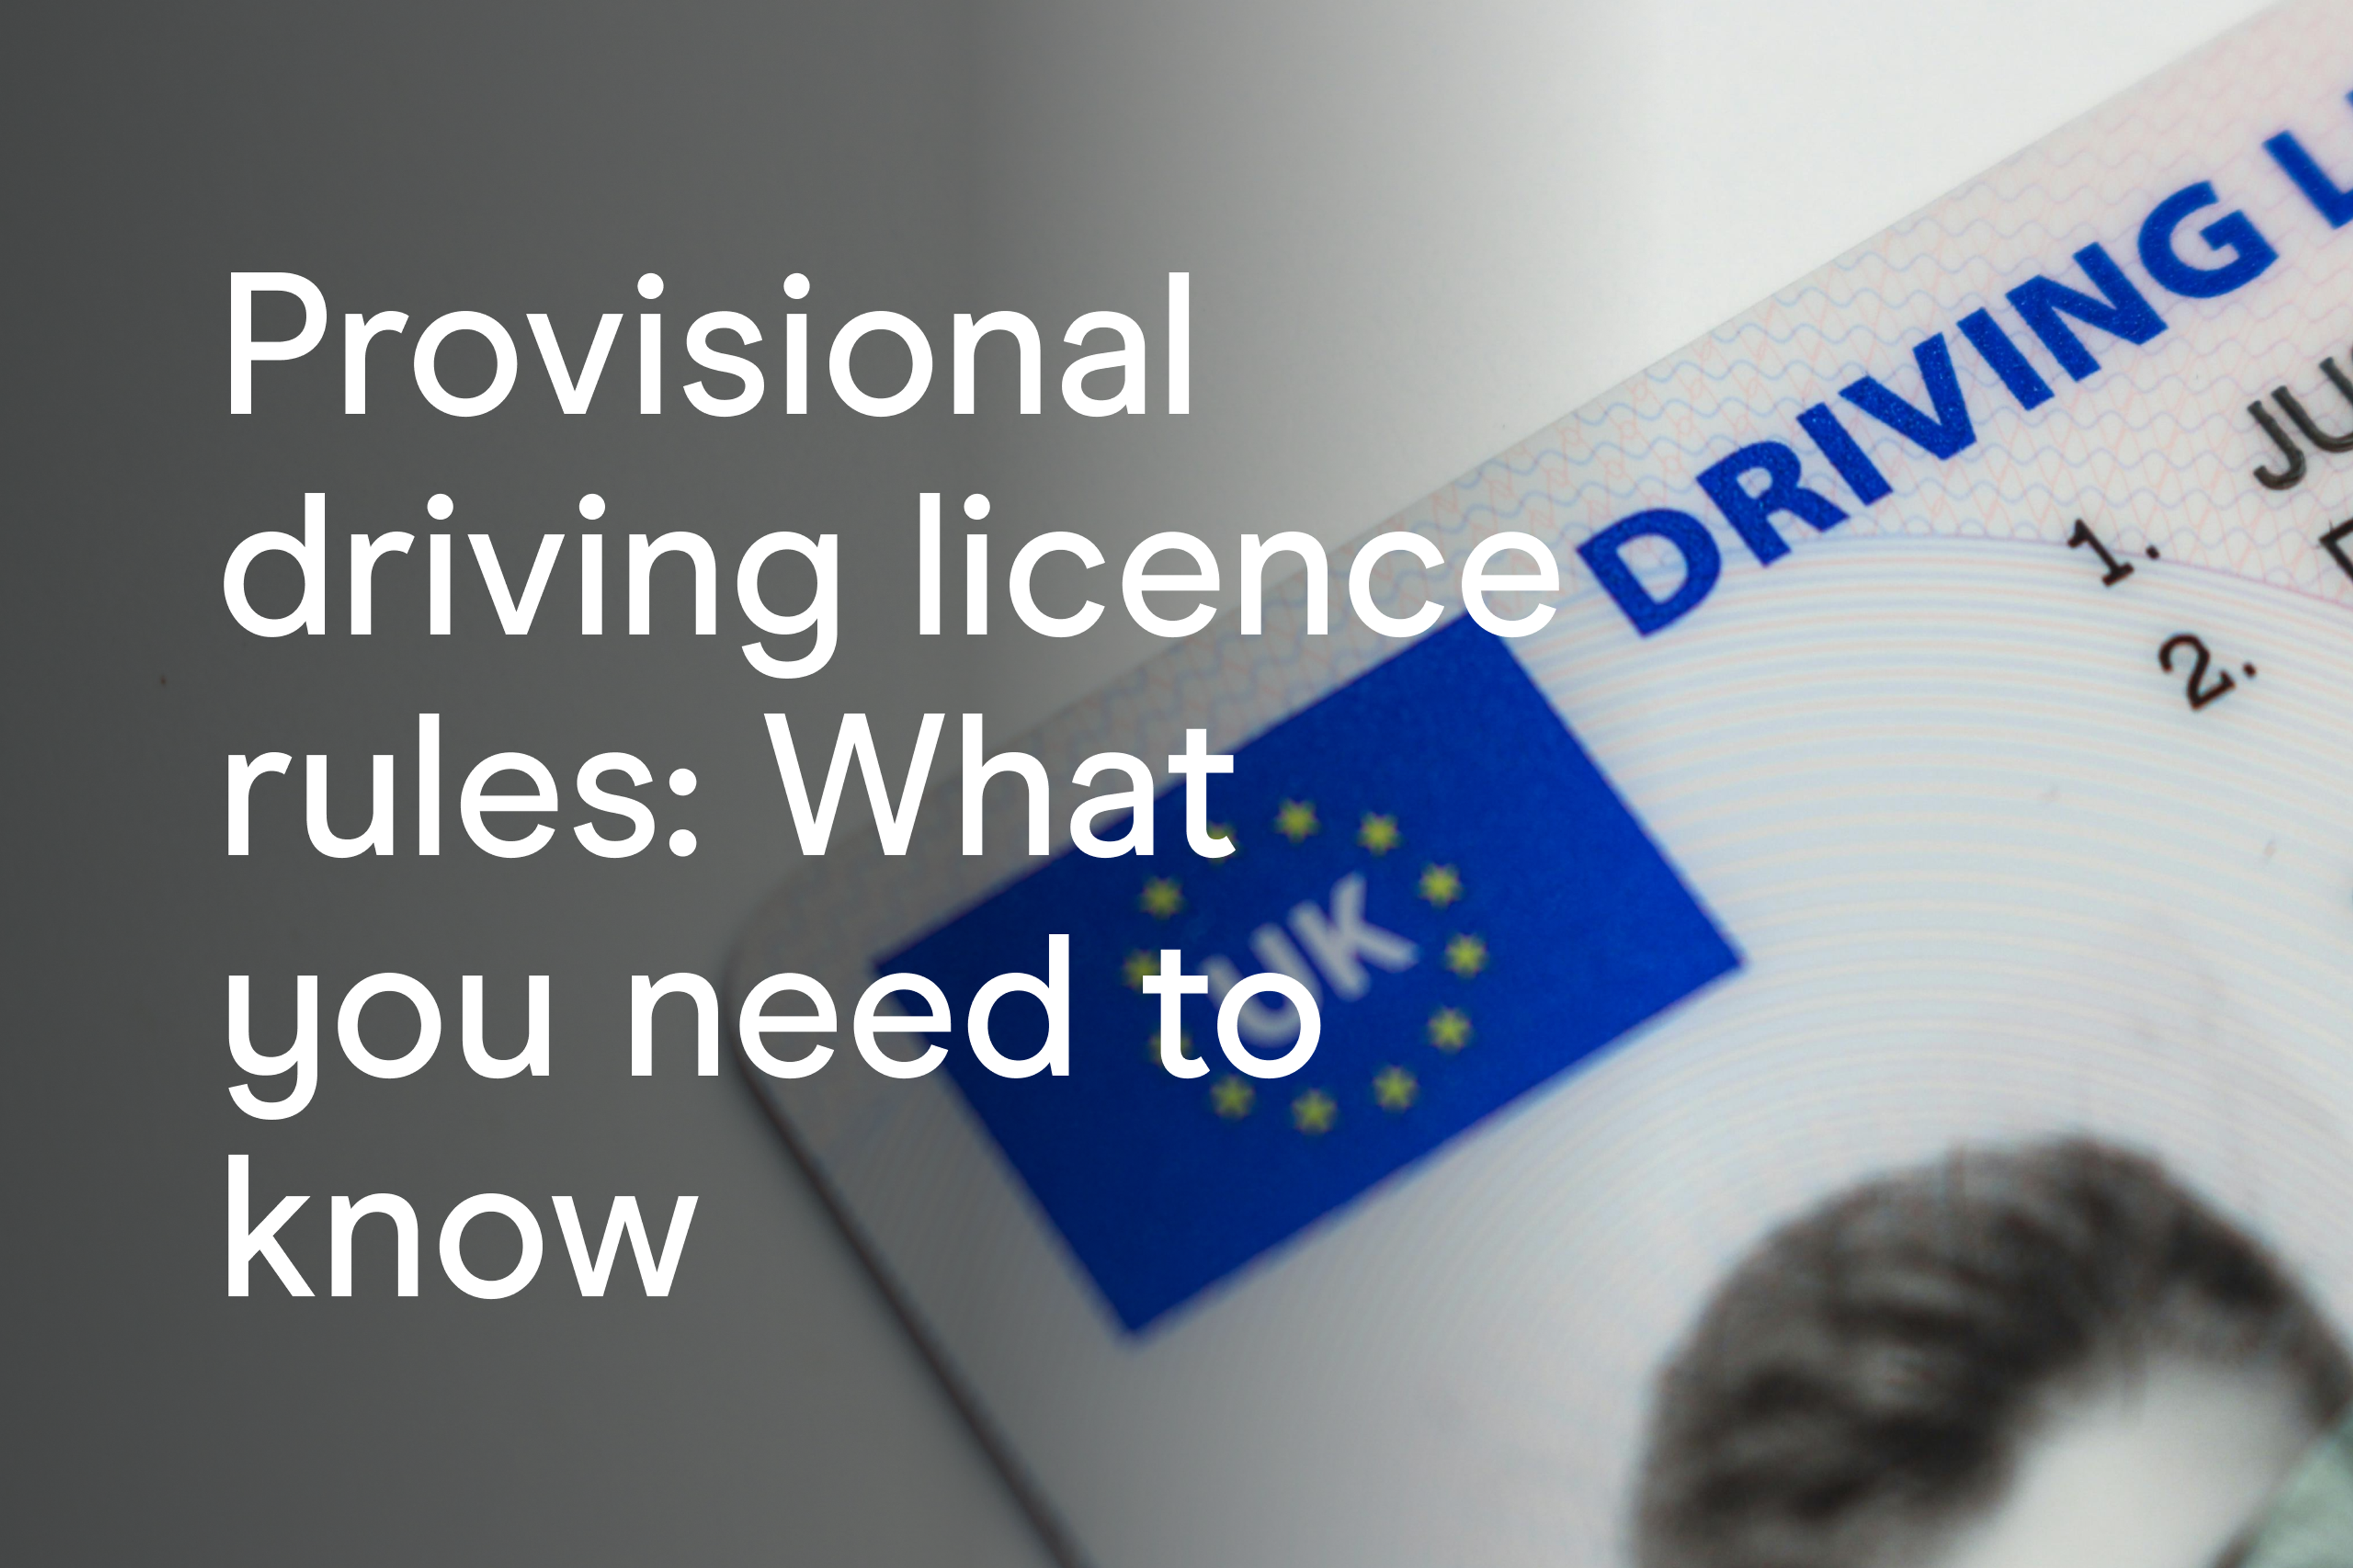 Provisional driving licence rules: What you need to know